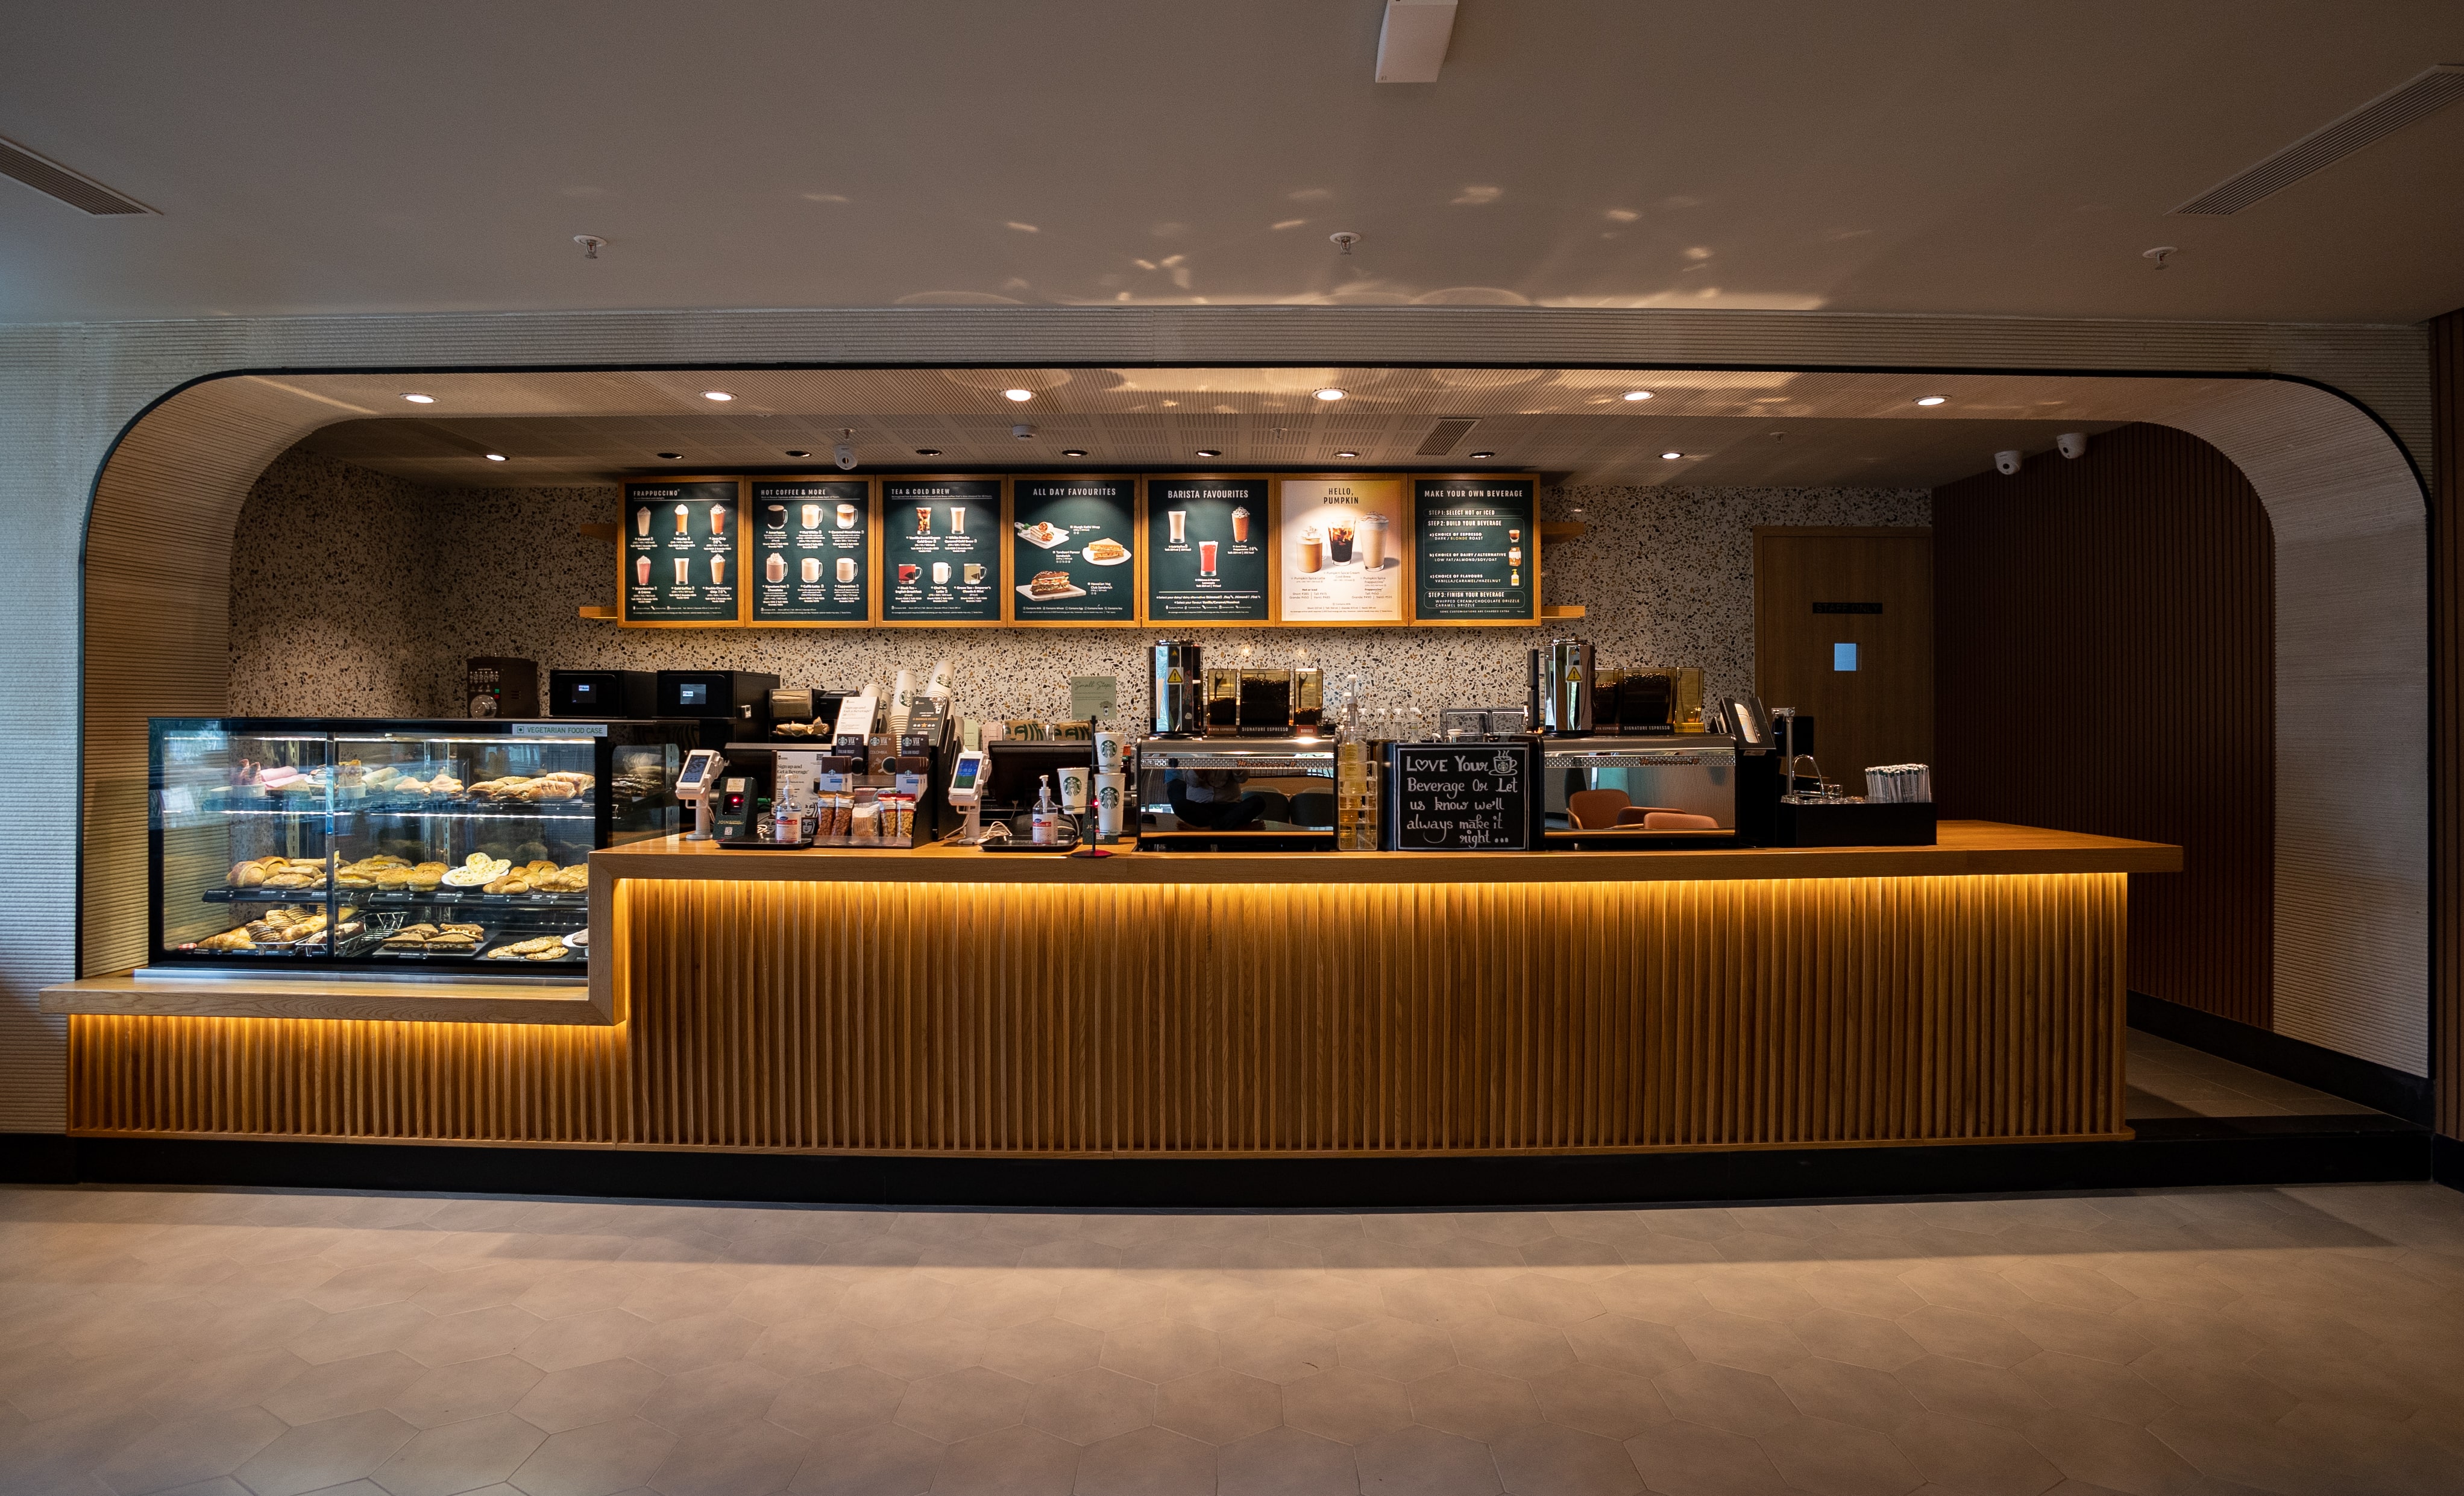 Tata Starbucks expands its footprint in Rajasthan with the launch of its first store in Udaipur